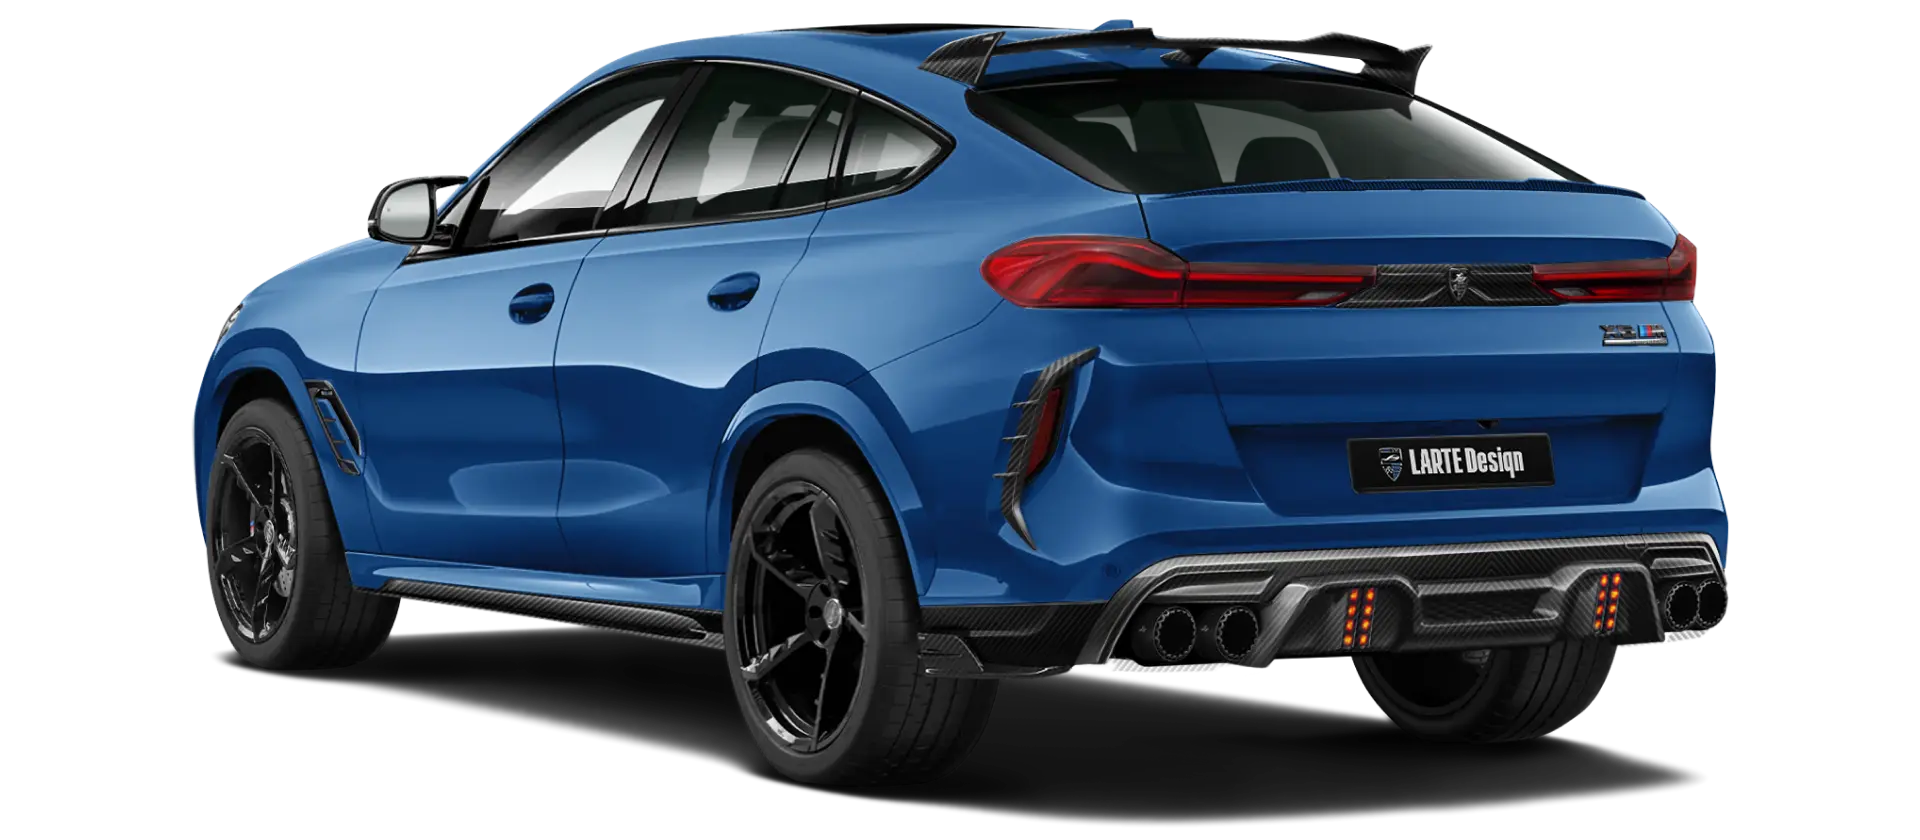 BMW X6M F96 LCI 2023 with carbon body kit: back view shown in Marina Bay